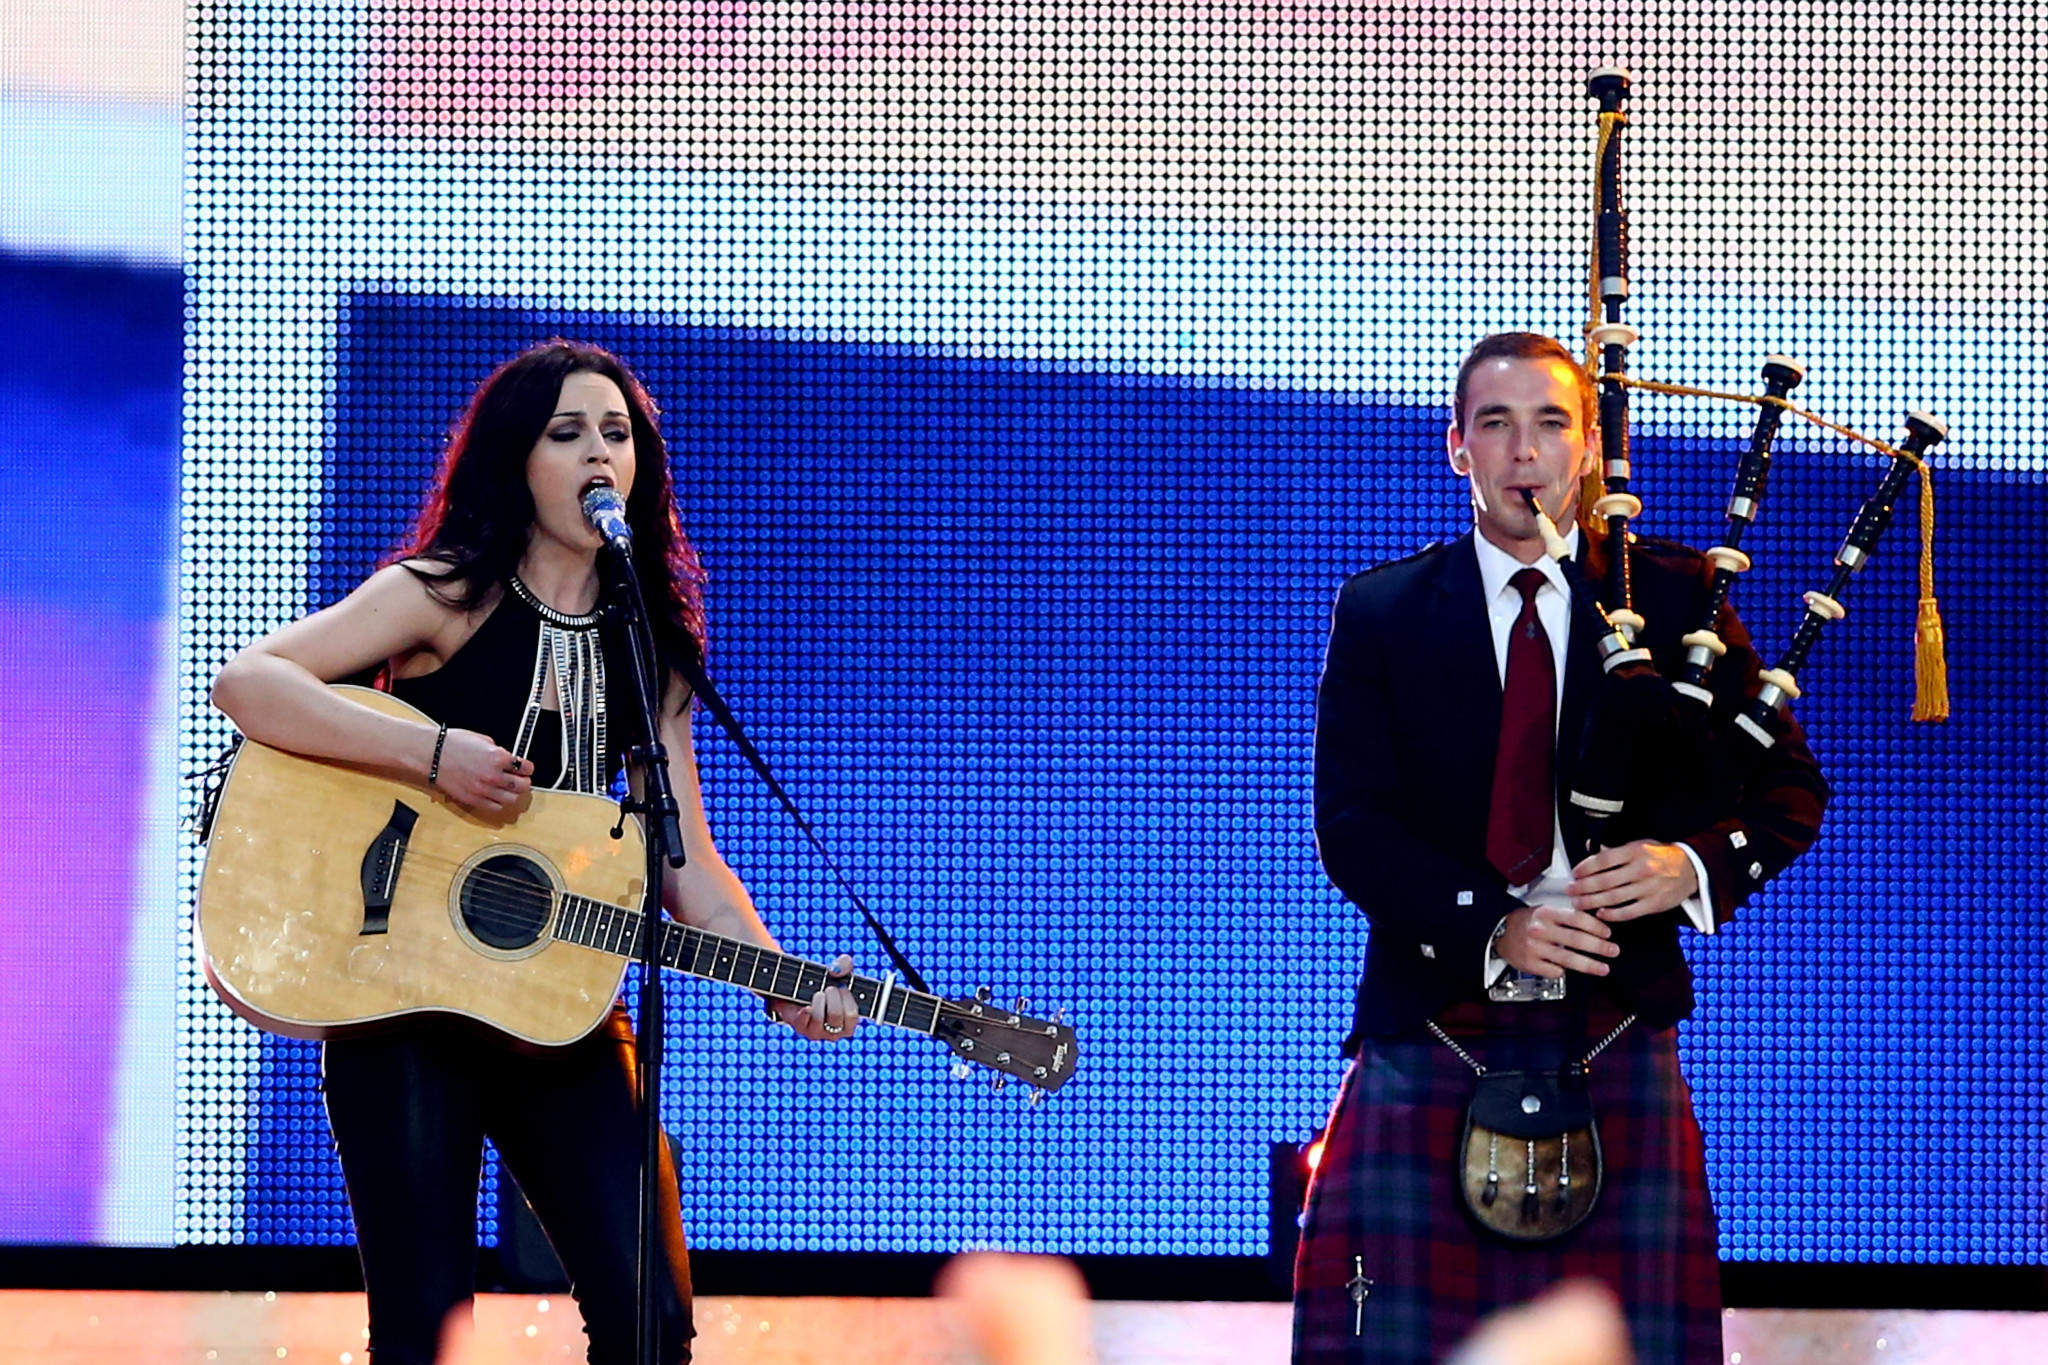 Amy Macdonald performs alongside a piper at the Glasgow 2014 Opening Ceremony ©Getty Images